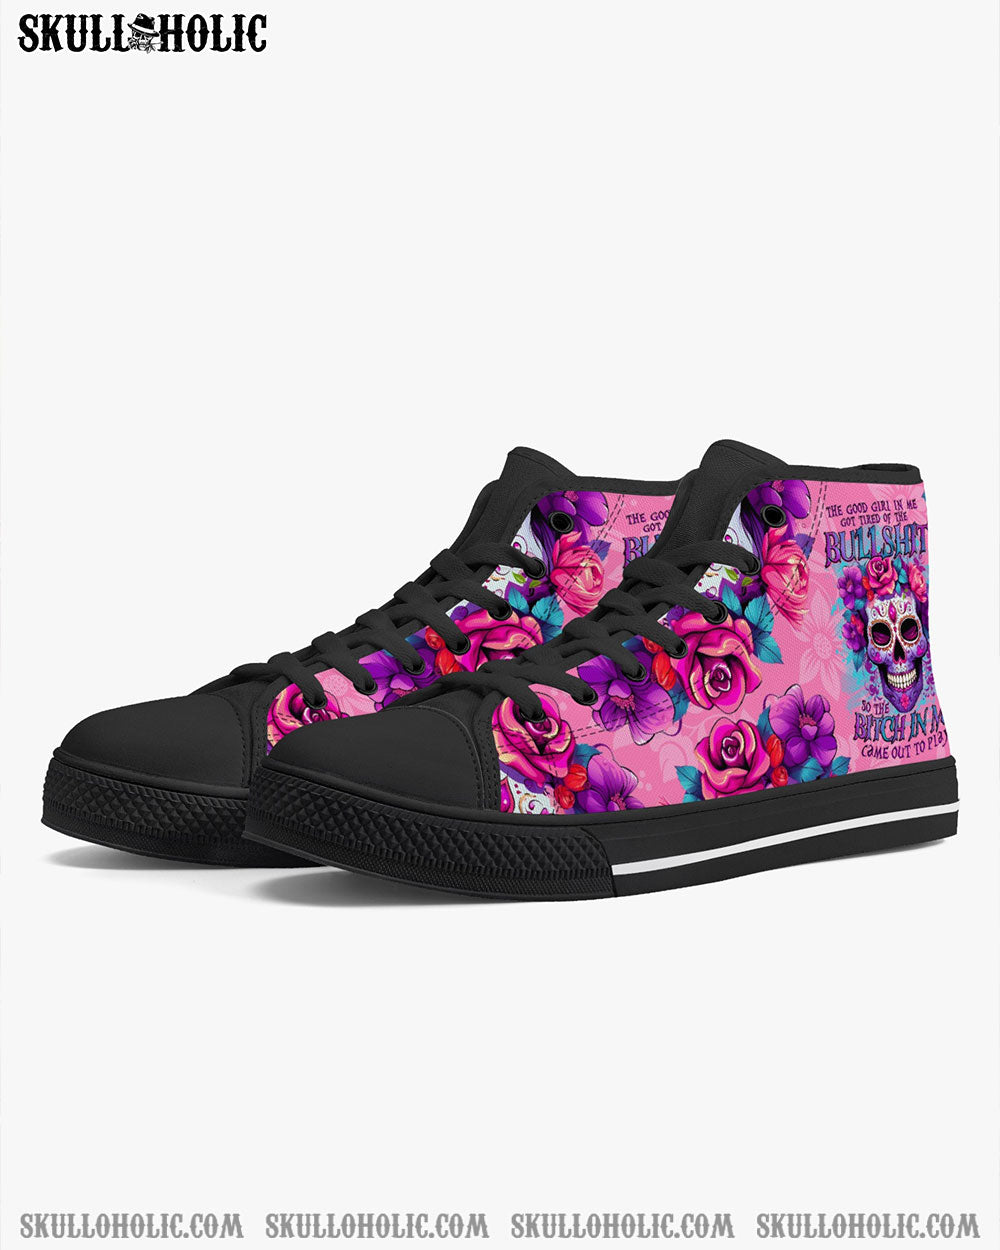 THE GOOD GIRL IN ME SUGAR SKULL HIGH TOP CANVAS SHOES - TLNO2410234